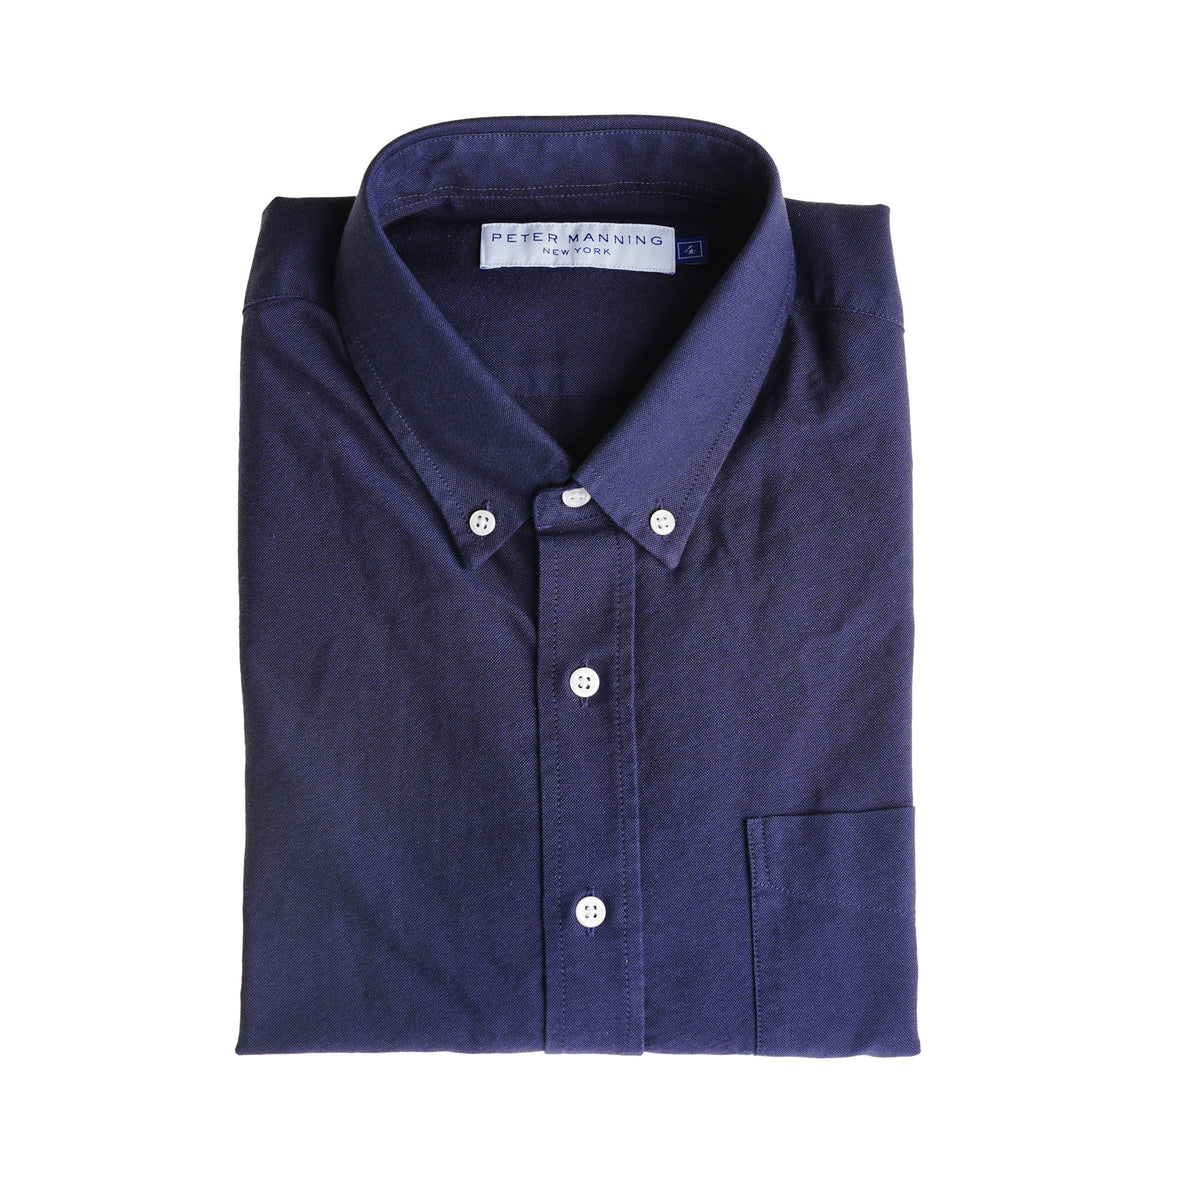 Weekend Oxford Standard Fit, Navy | Peter Manning NYC